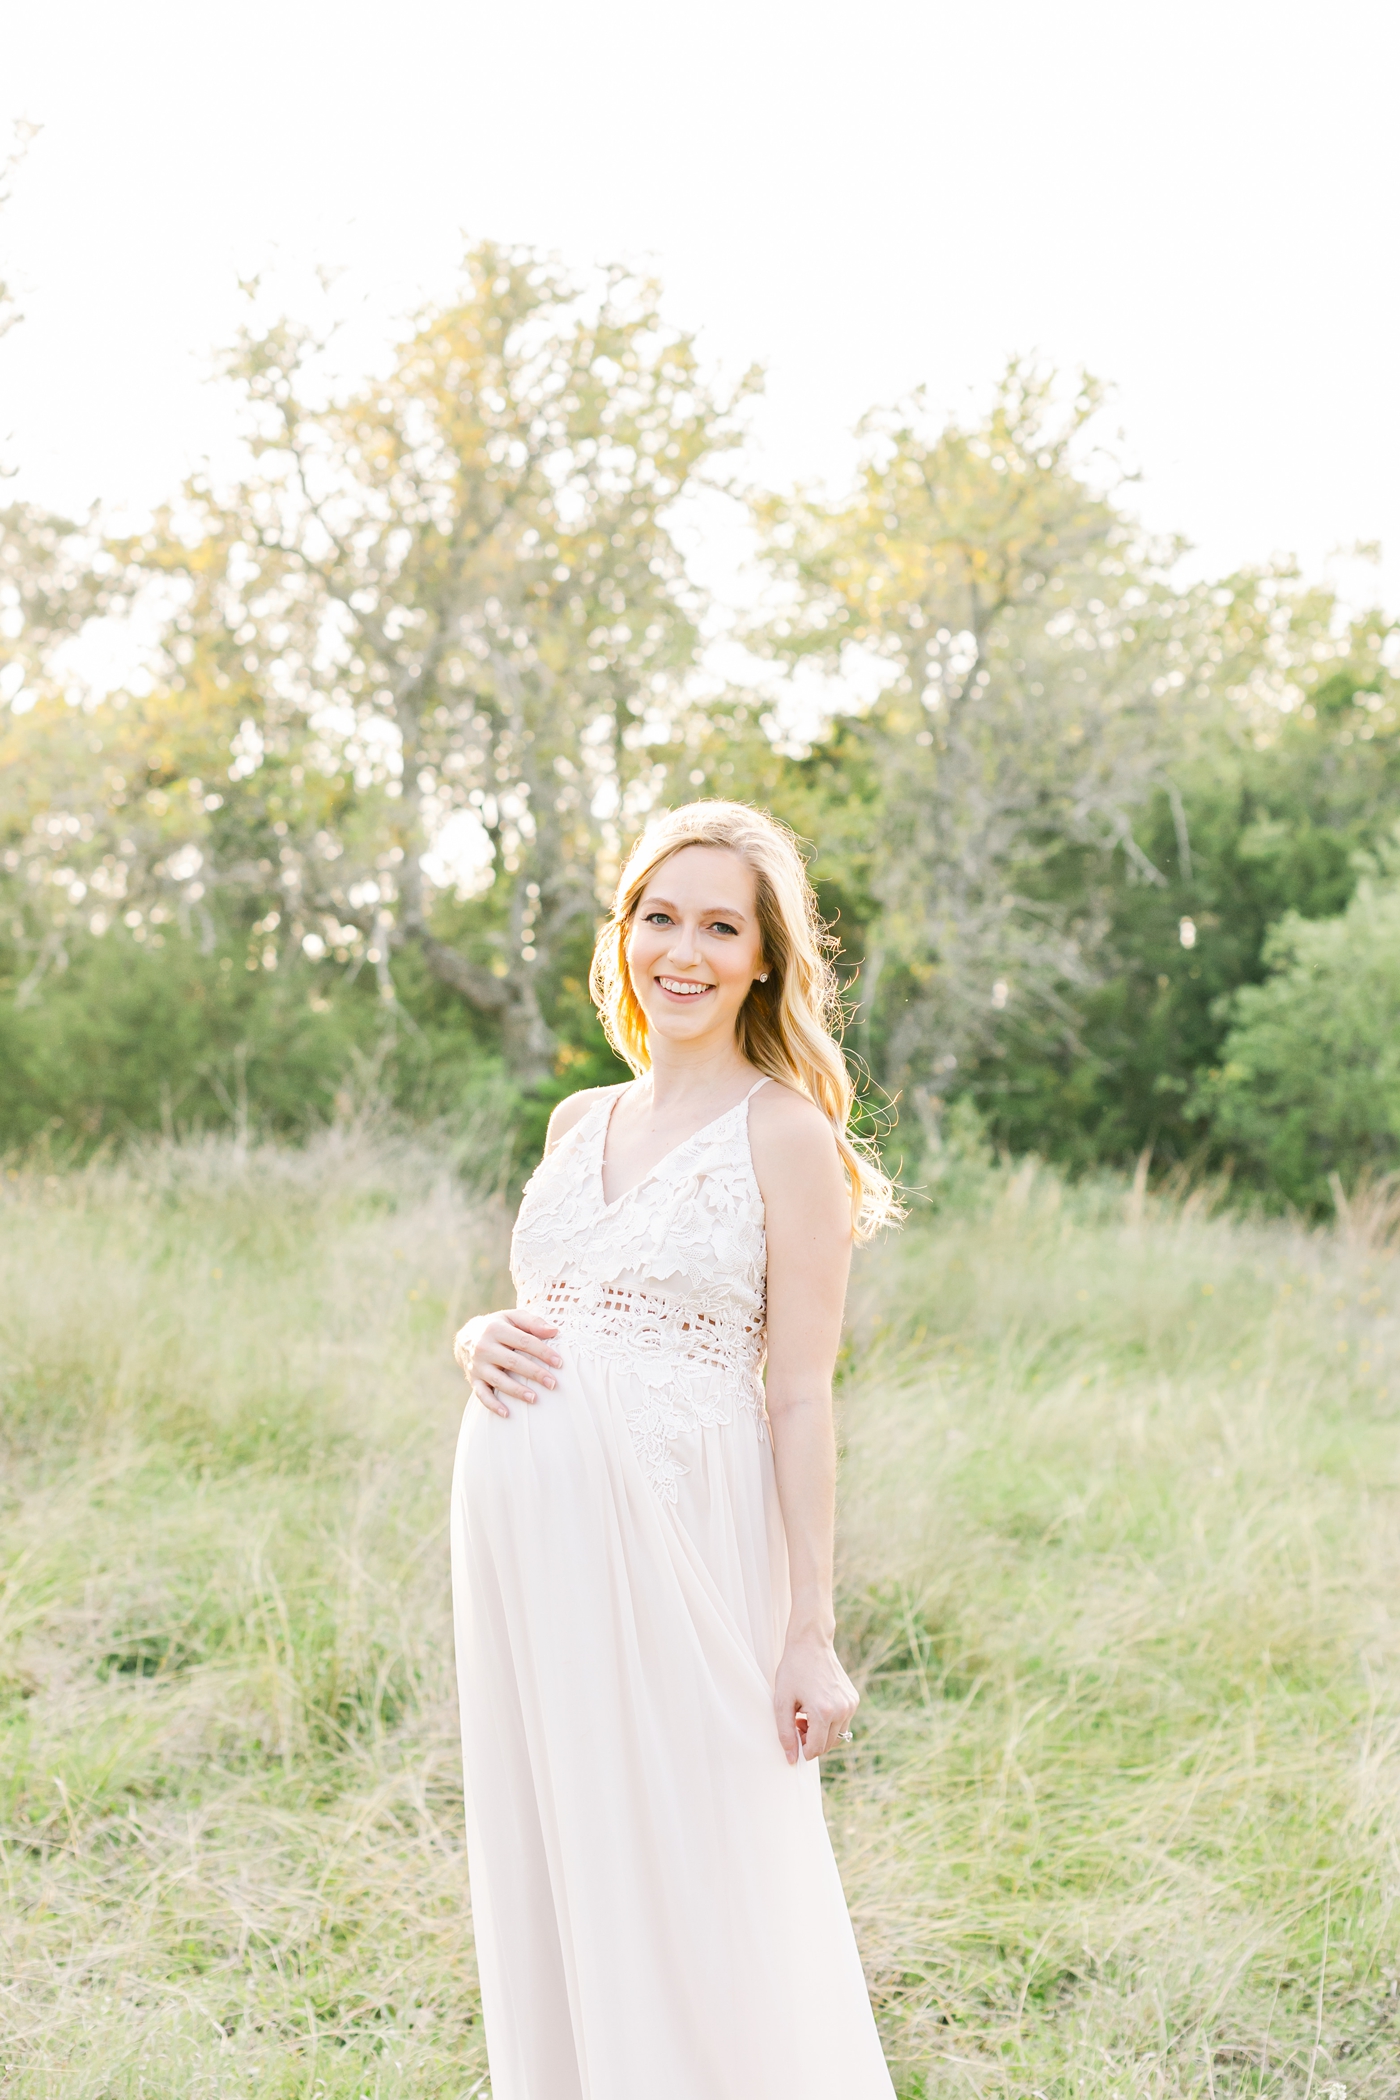 Mom wearing white maxi dress with lace during maternity session in field with tall grass. Photo by Sana Ahmed Photography.